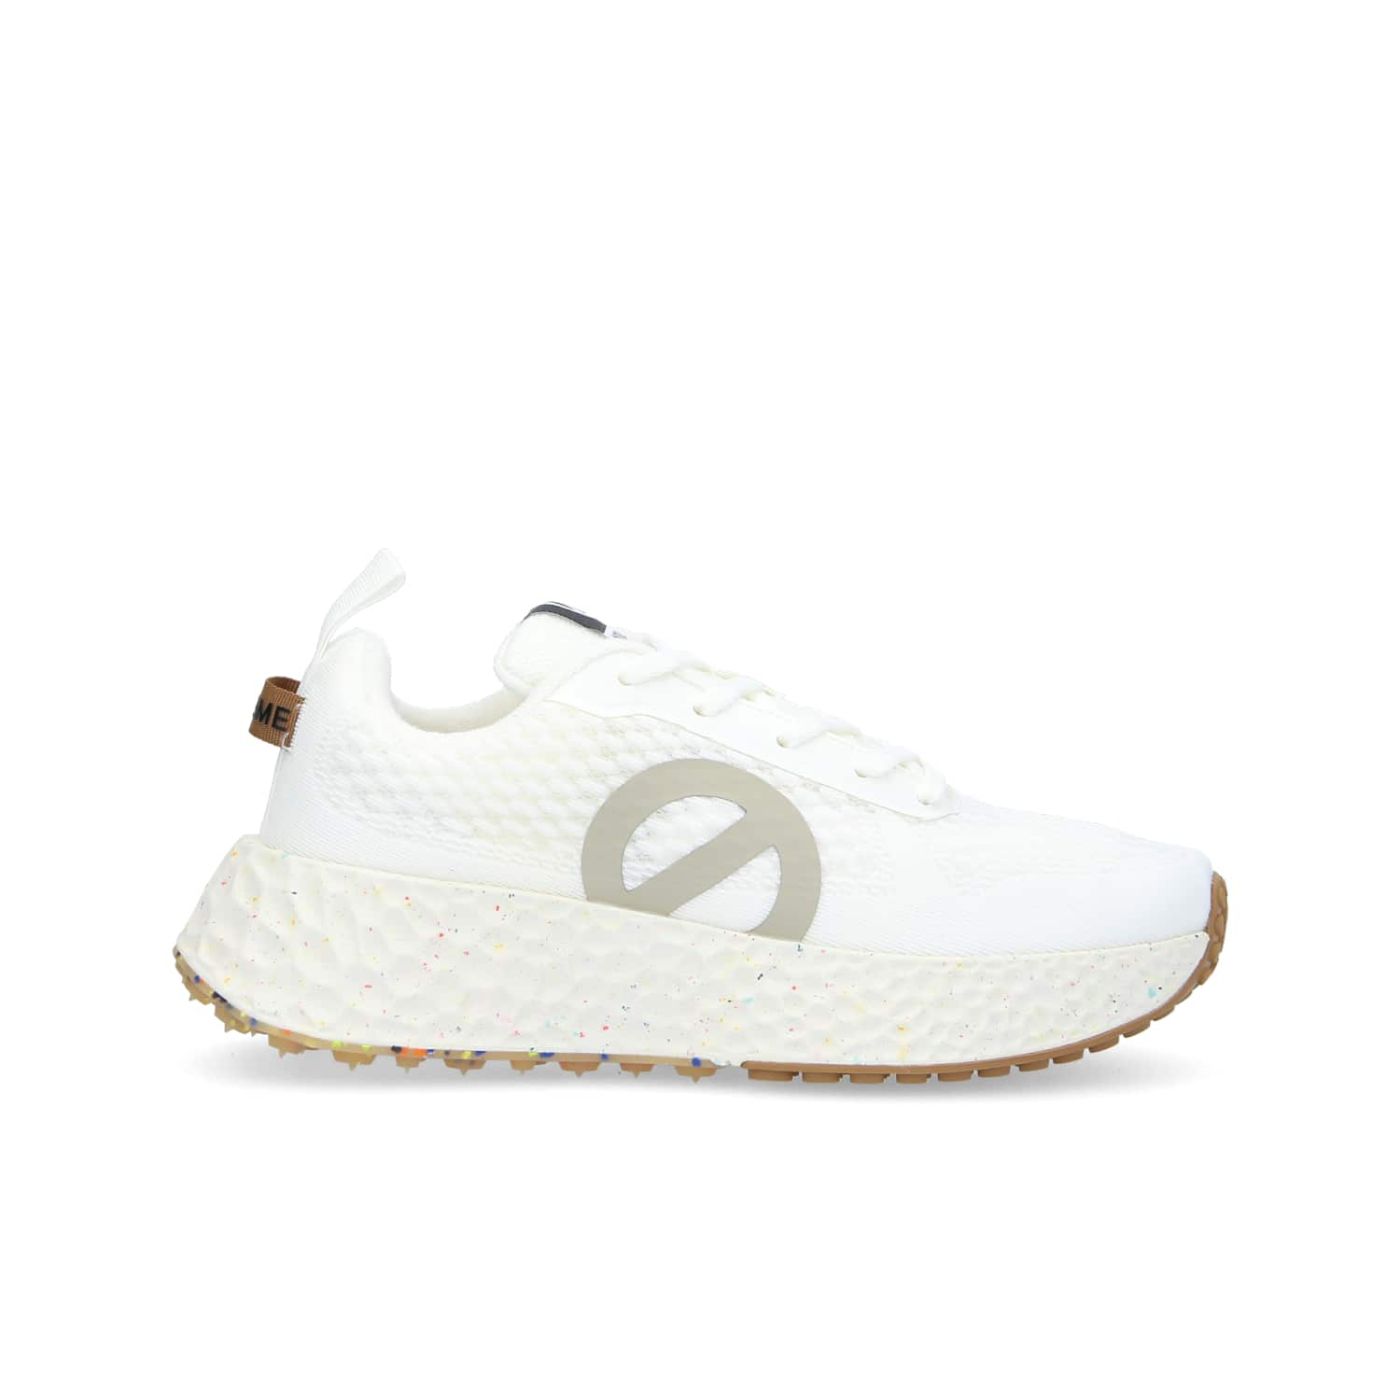 CARTER FLY - MESH RECYCLED* - WHITE/GREGE